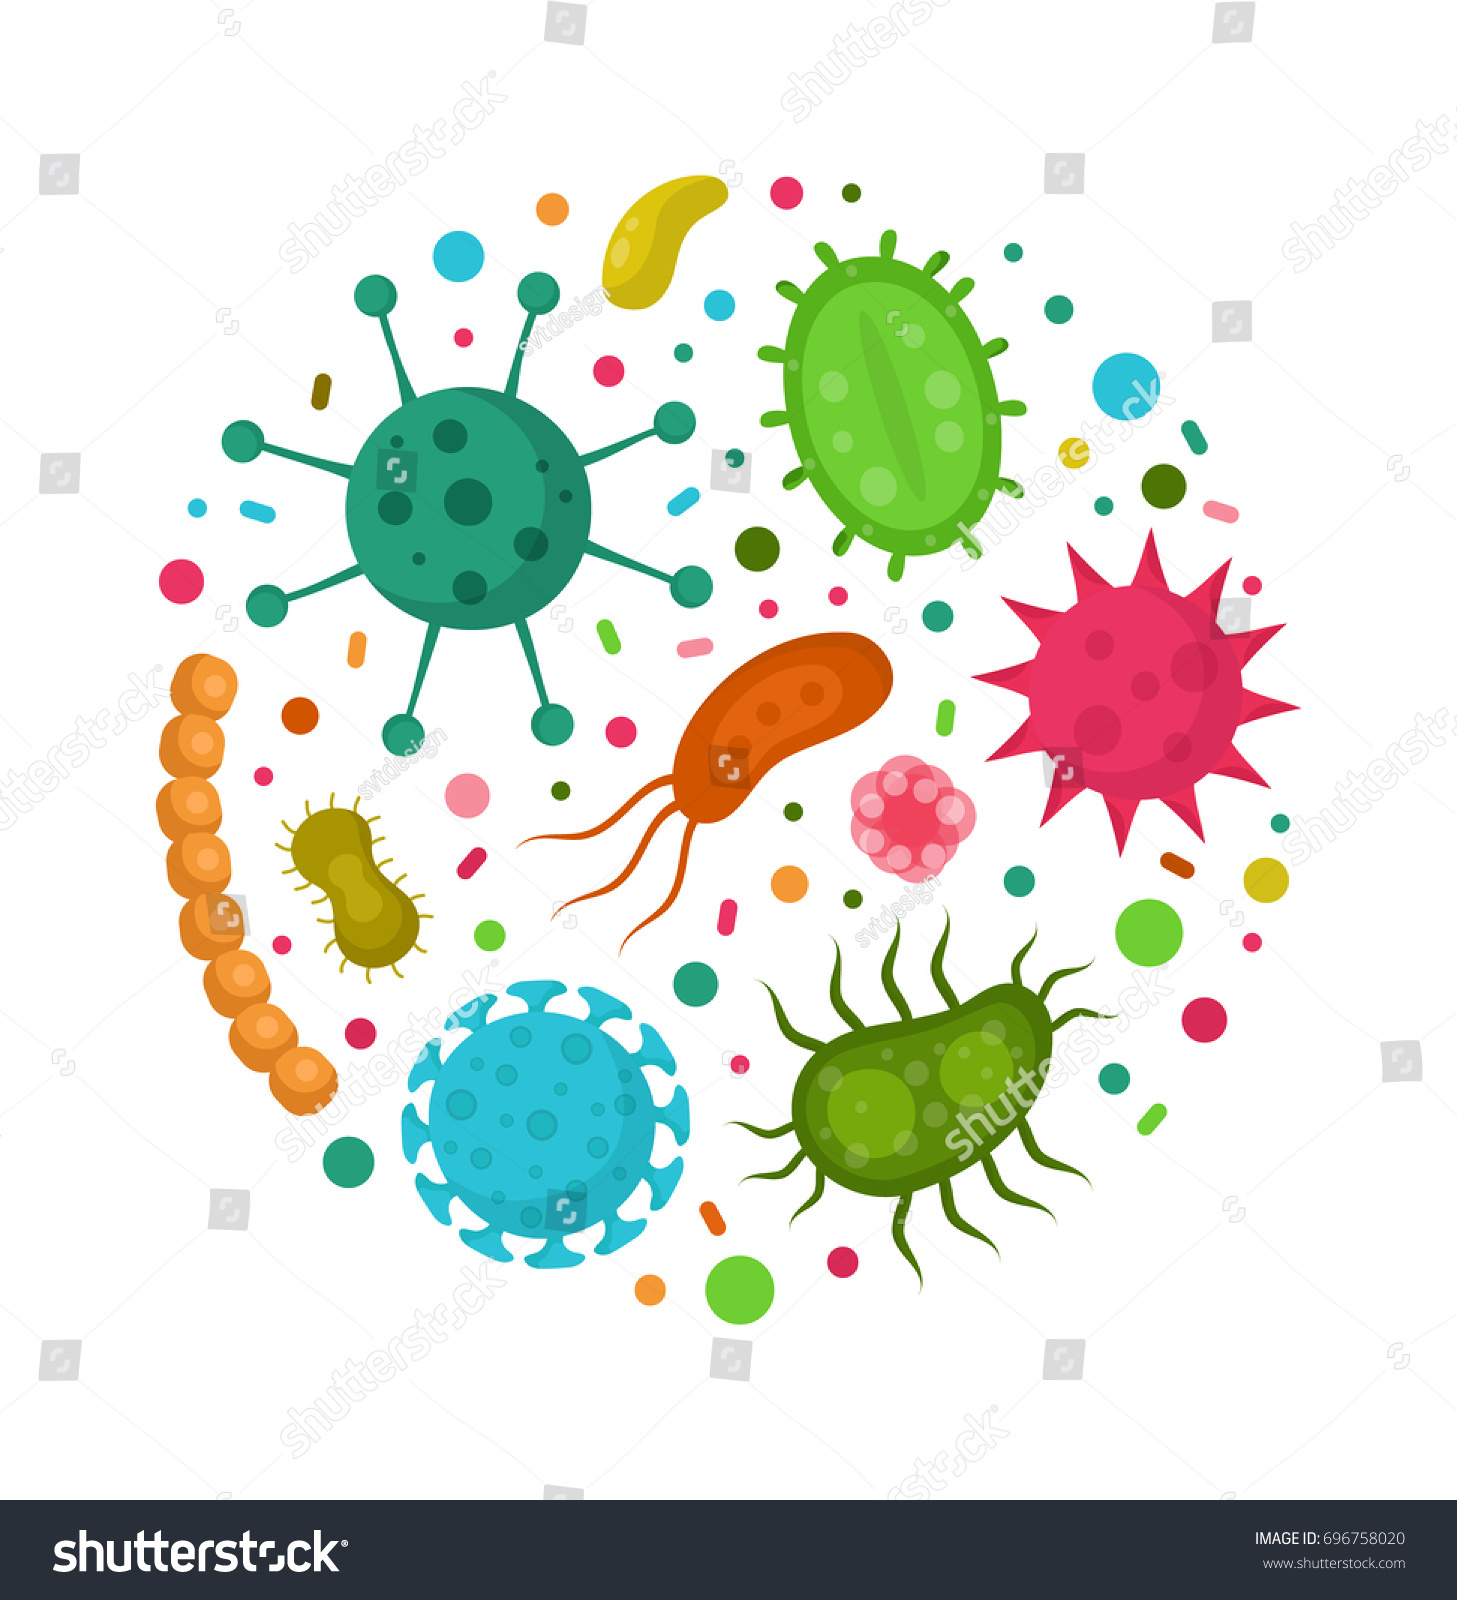 19,689 Bacterial infection icon Images, Stock Photos & Vectors